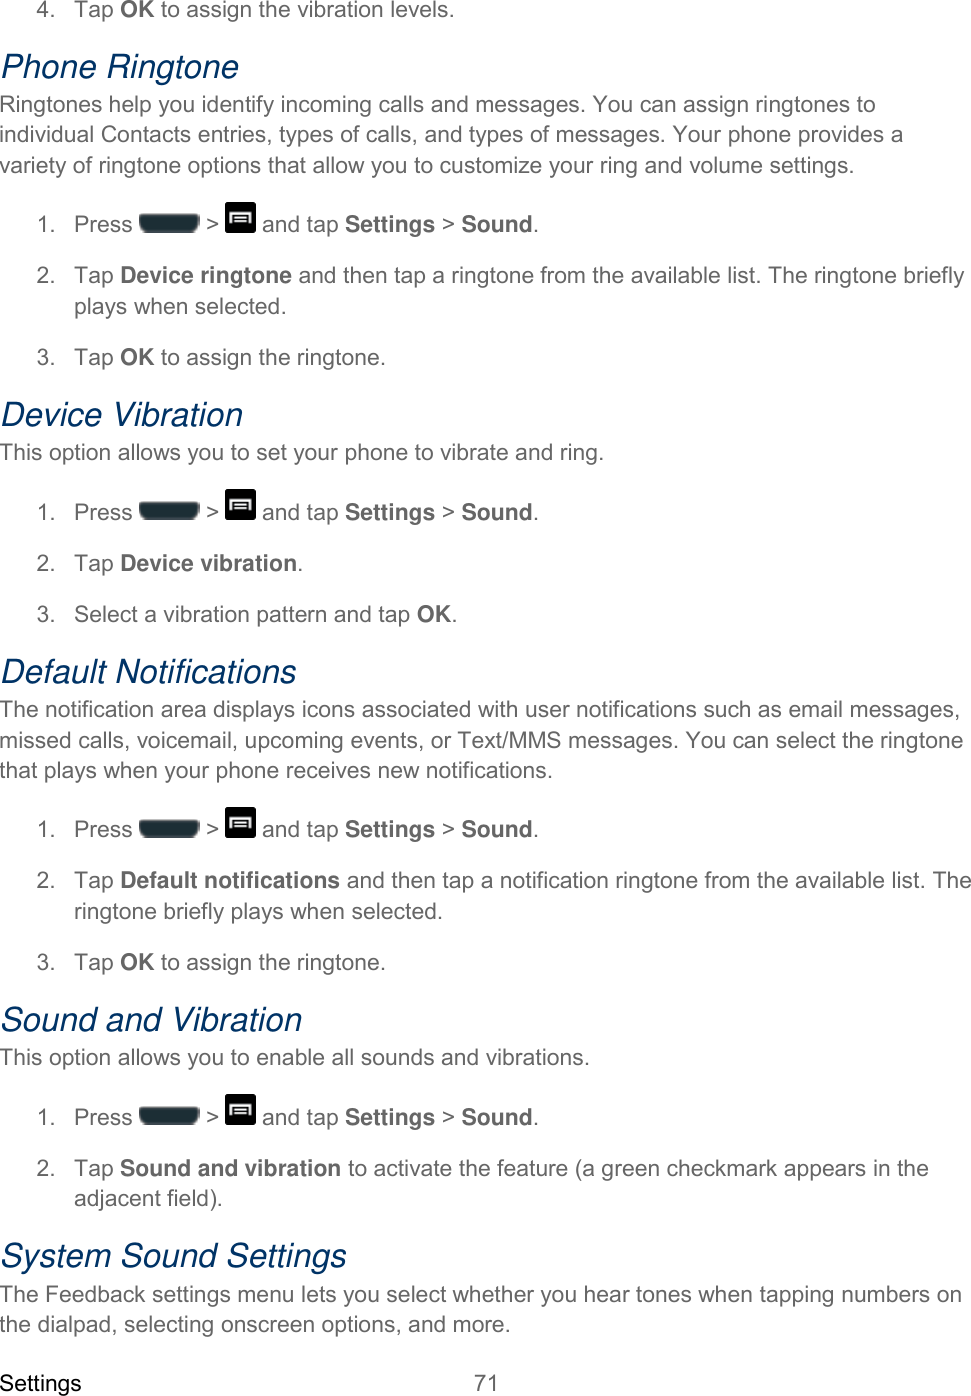 Settings 71   4.  Tap OK to assign the vibration levels. Phone Ringtone Ringtones help you identify incoming calls and messages. You can assign ringtones to individual Contacts entries, types of calls, and types of messages. Your phone provides a variety of ringtone options that allow you to customize your ring and volume settings. 1.  Press   &gt;   and tap Settings &gt; Sound. 2.  Tap Device ringtone and then tap a ringtone from the available list. The ringtone briefly plays when selected.  3.  Tap OK to assign the ringtone. Device Vibration This option allows you to set your phone to vibrate and ring. 1.  Press   &gt;   and tap Settings &gt; Sound. 2.  Tap Device vibration. 3.  Select a vibration pattern and tap OK. Default Notifications The notification area displays icons associated with user notifications such as email messages, missed calls, voicemail, upcoming events, or Text/MMS messages. You can select the ringtone that plays when your phone receives new notifications. 1.  Press   &gt;   and tap Settings &gt; Sound. 2.  Tap Default notifications and then tap a notification ringtone from the available list. The ringtone briefly plays when selected.  3.  Tap OK to assign the ringtone. Sound and Vibration This option allows you to enable all sounds and vibrations. 1.  Press   &gt;   and tap Settings &gt; Sound. 2.  Tap Sound and vibration to activate the feature (a green checkmark appears in the adjacent field). System Sound Settings The Feedback settings menu lets you select whether you hear tones when tapping numbers on the dialpad, selecting onscreen options, and more. 